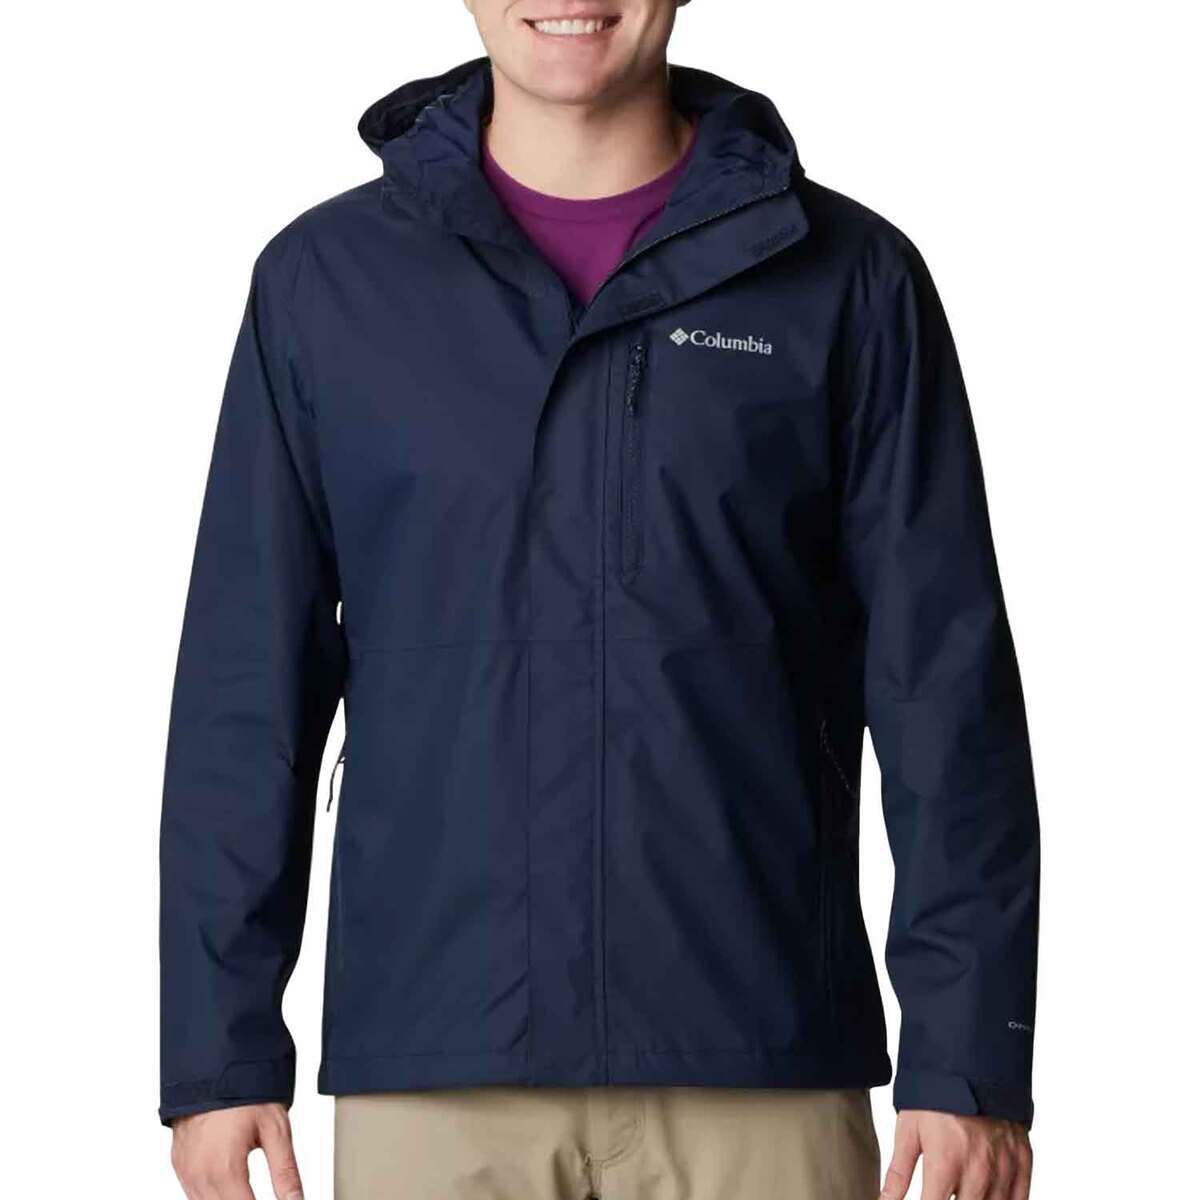 Columbia Sportswear Interchange Omni-Tech jacket, men's size Small (S) -  clothing & accessories - by owner - apparel